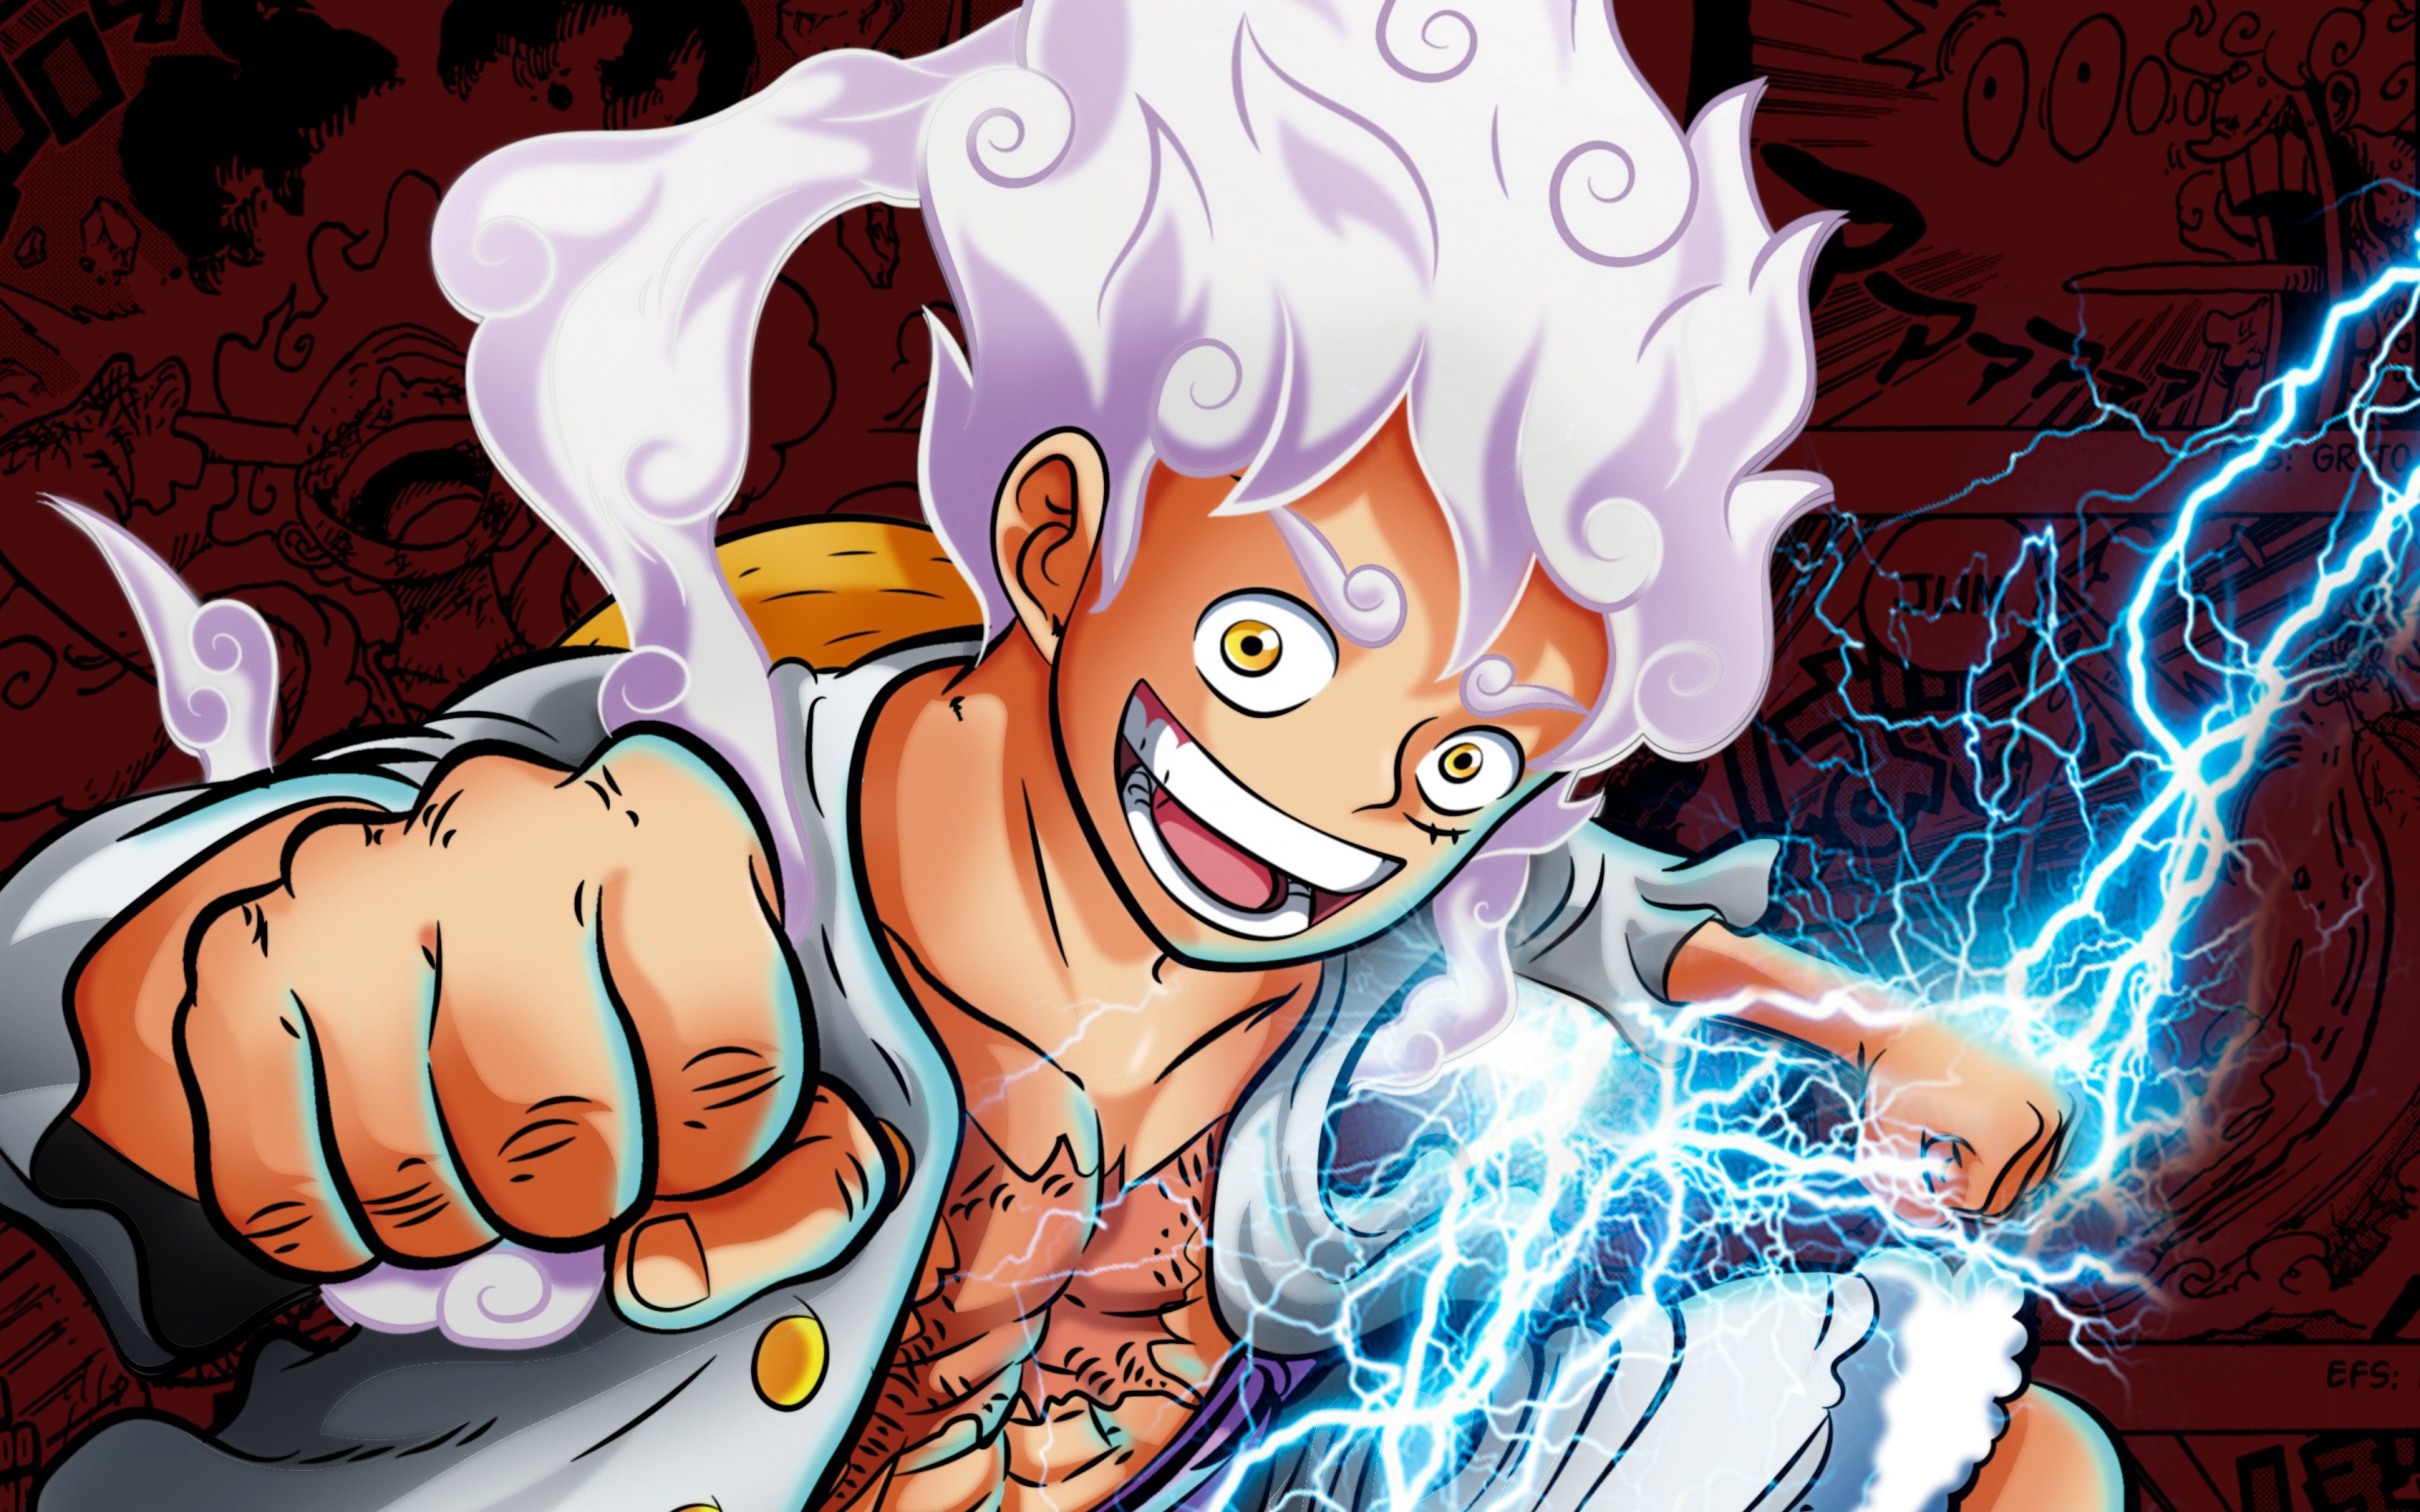 Best Luffy Gear 5 Wallpapers for Phone